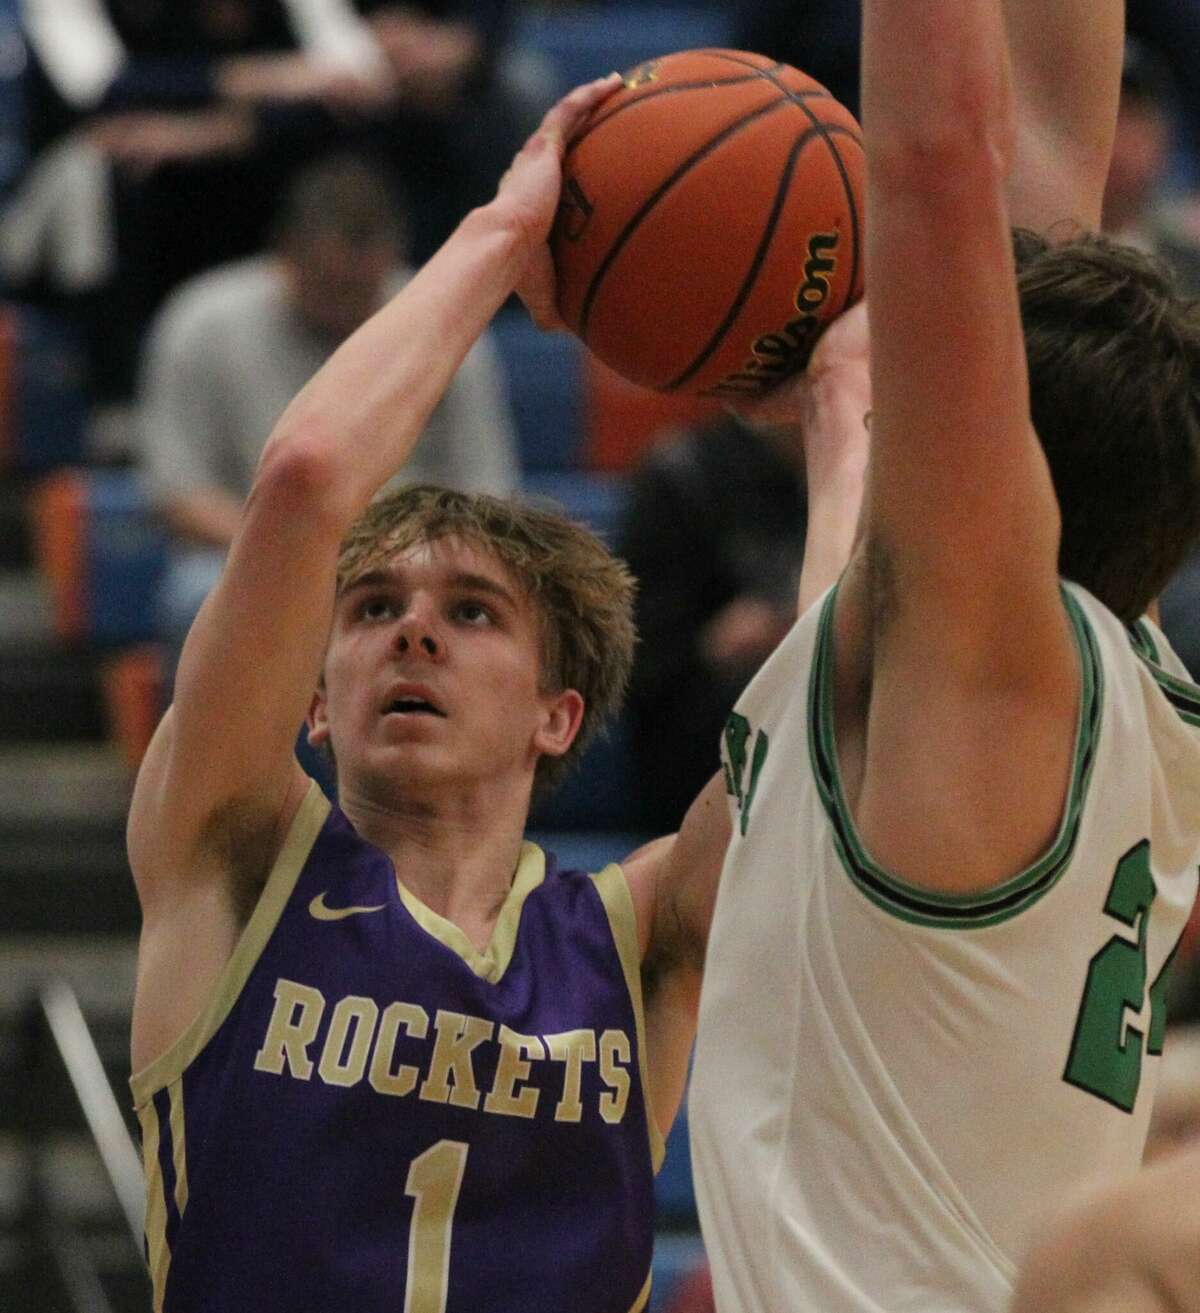 Action from the Routt boys' basketball team's loss to Eureka at the Riverton Shootout on Saturday